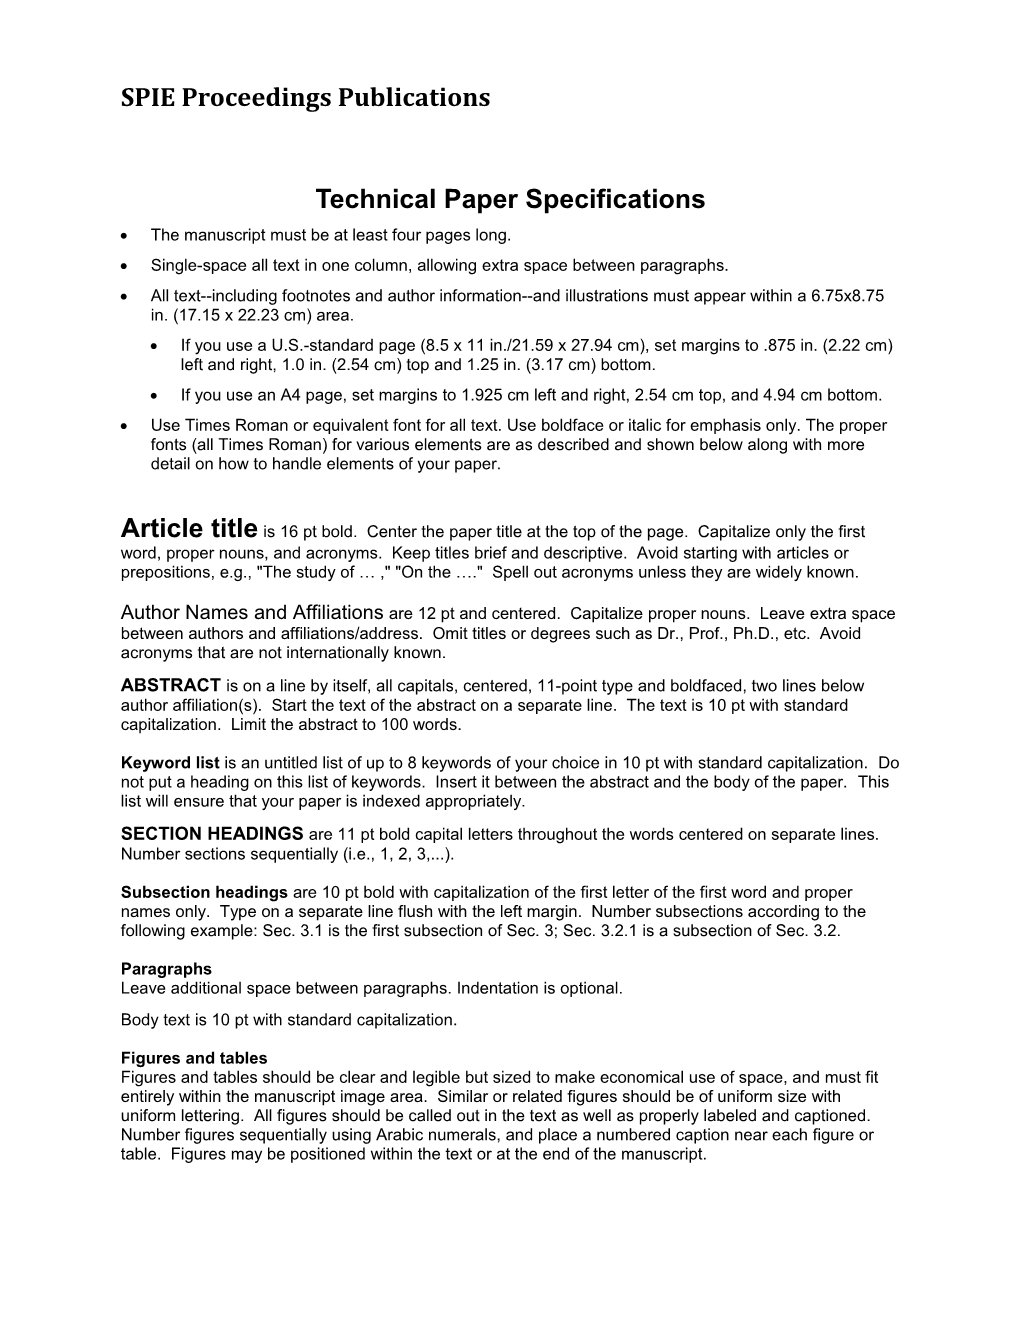 4-Page Technical Paper Specifications